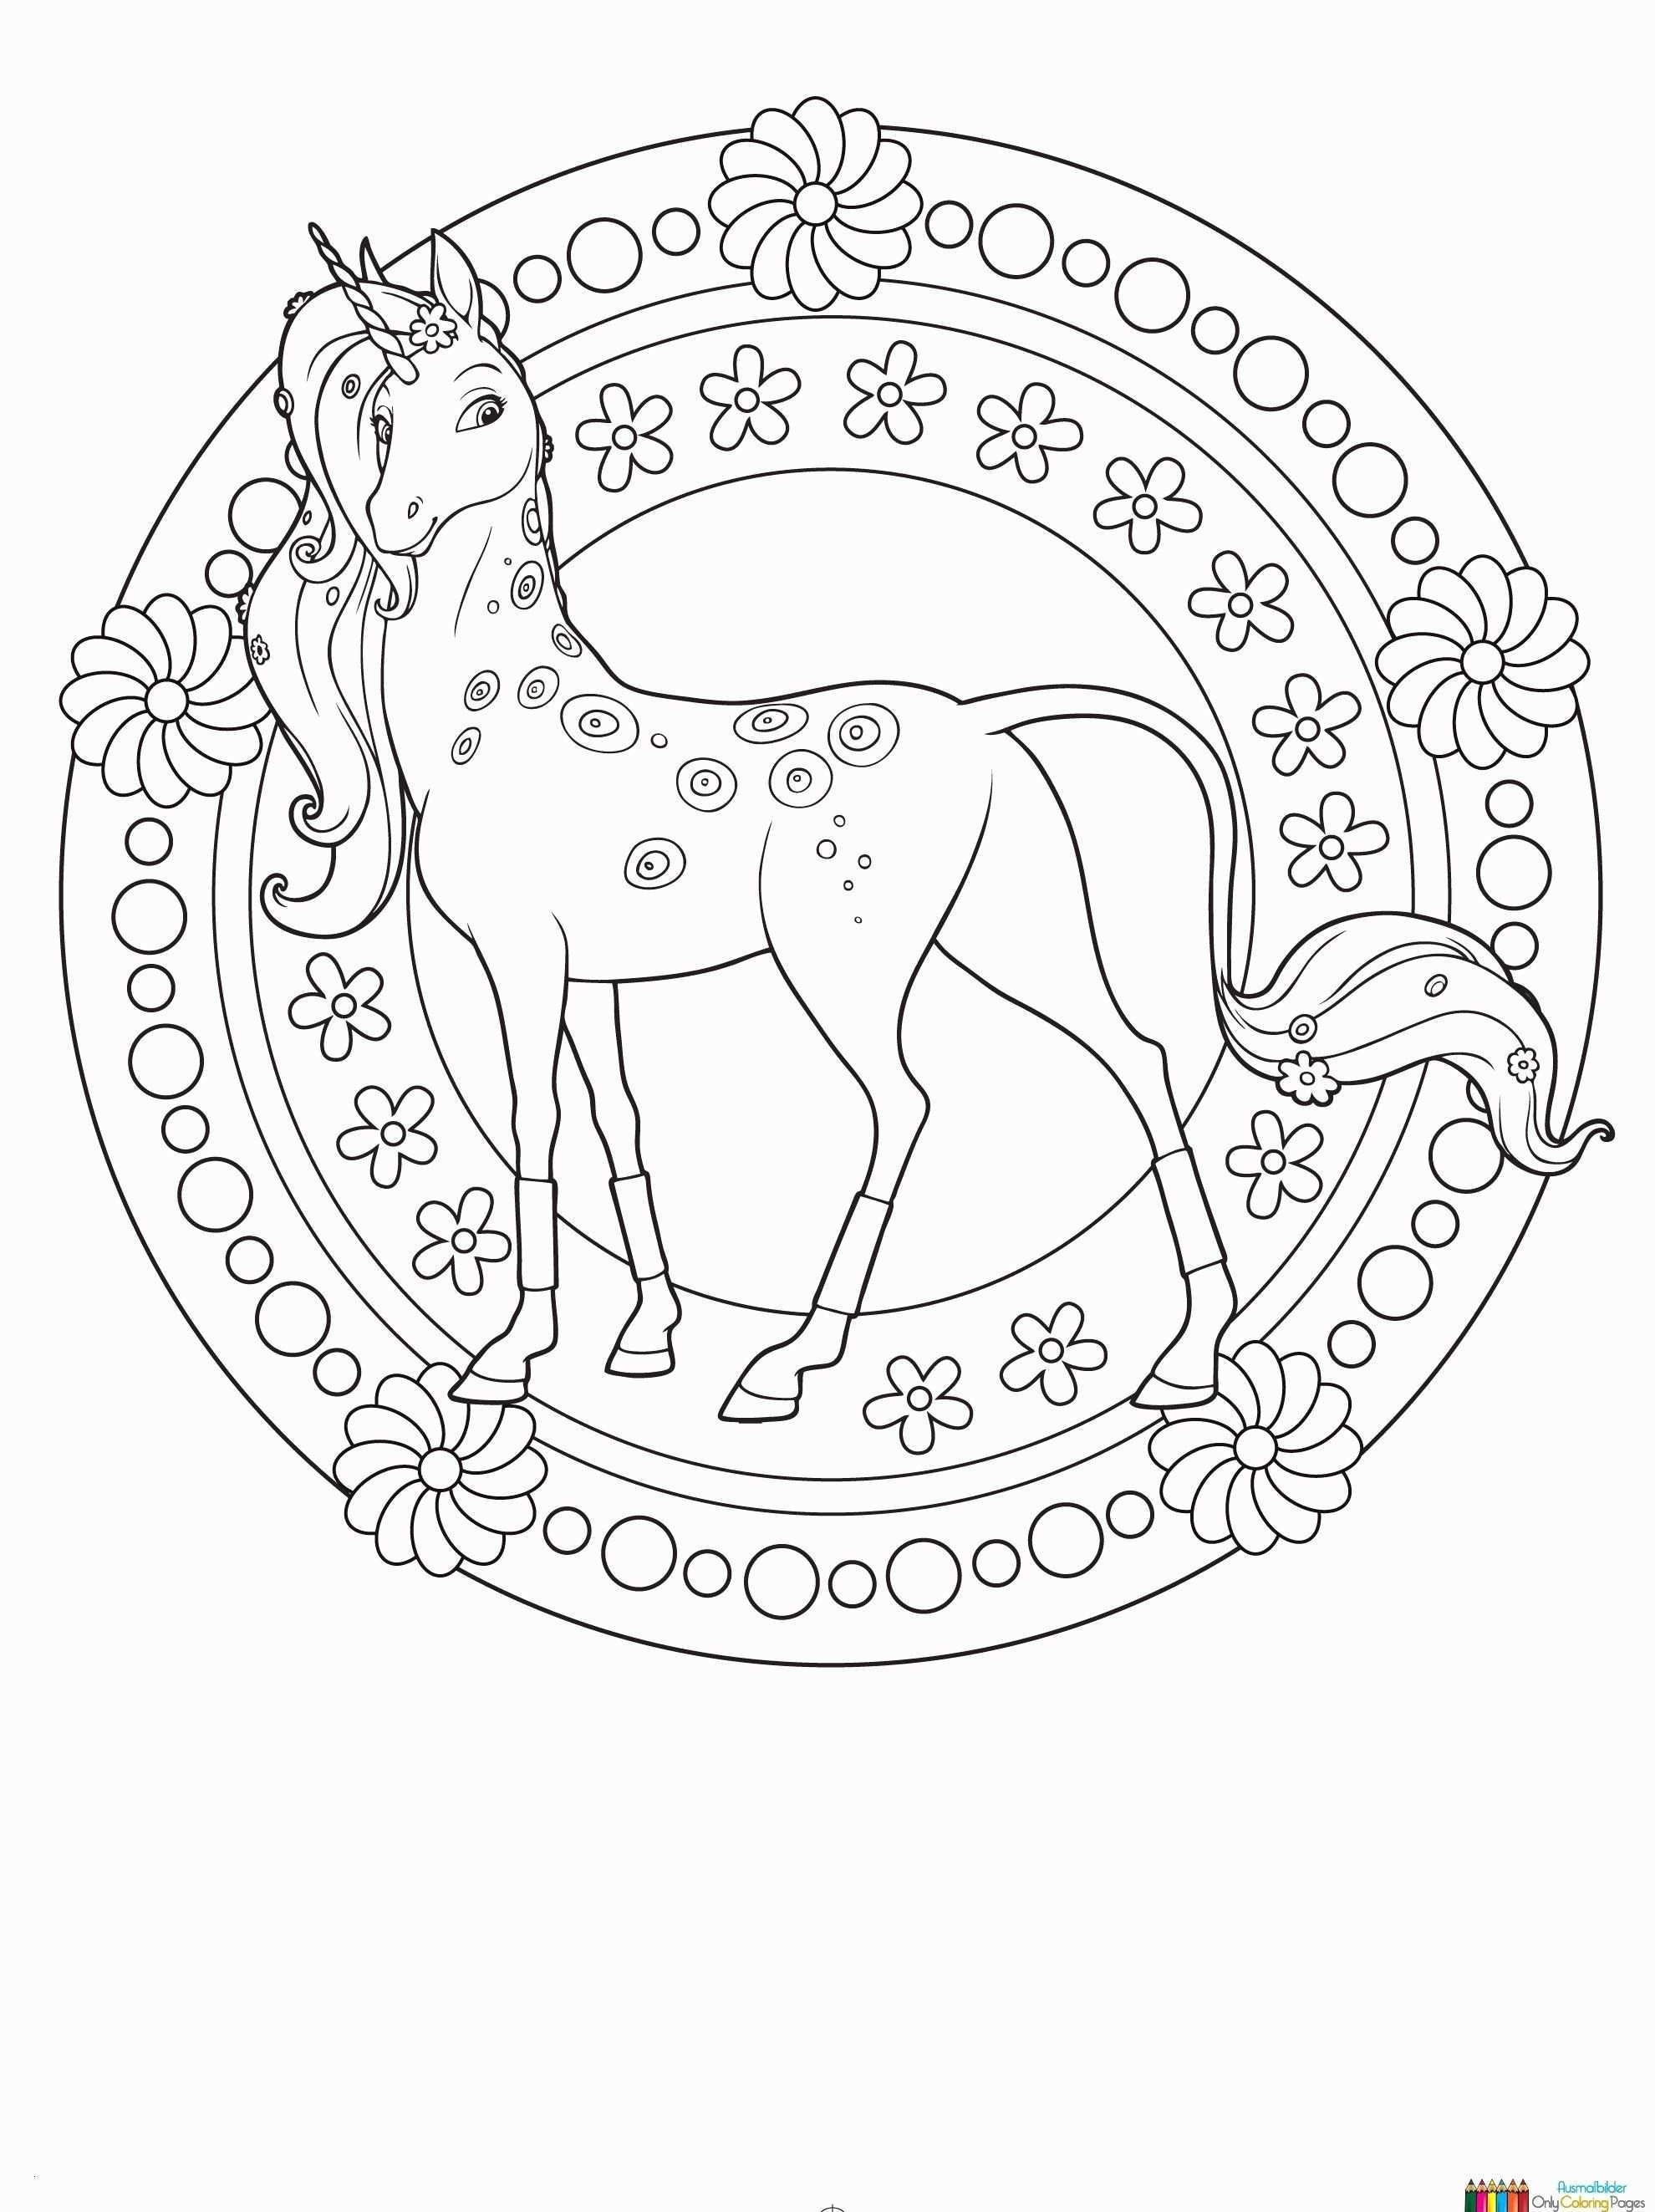 Transportation Coloring Pages Pdf Awesome 95 Convert To Coloring Page Free Kleurplate